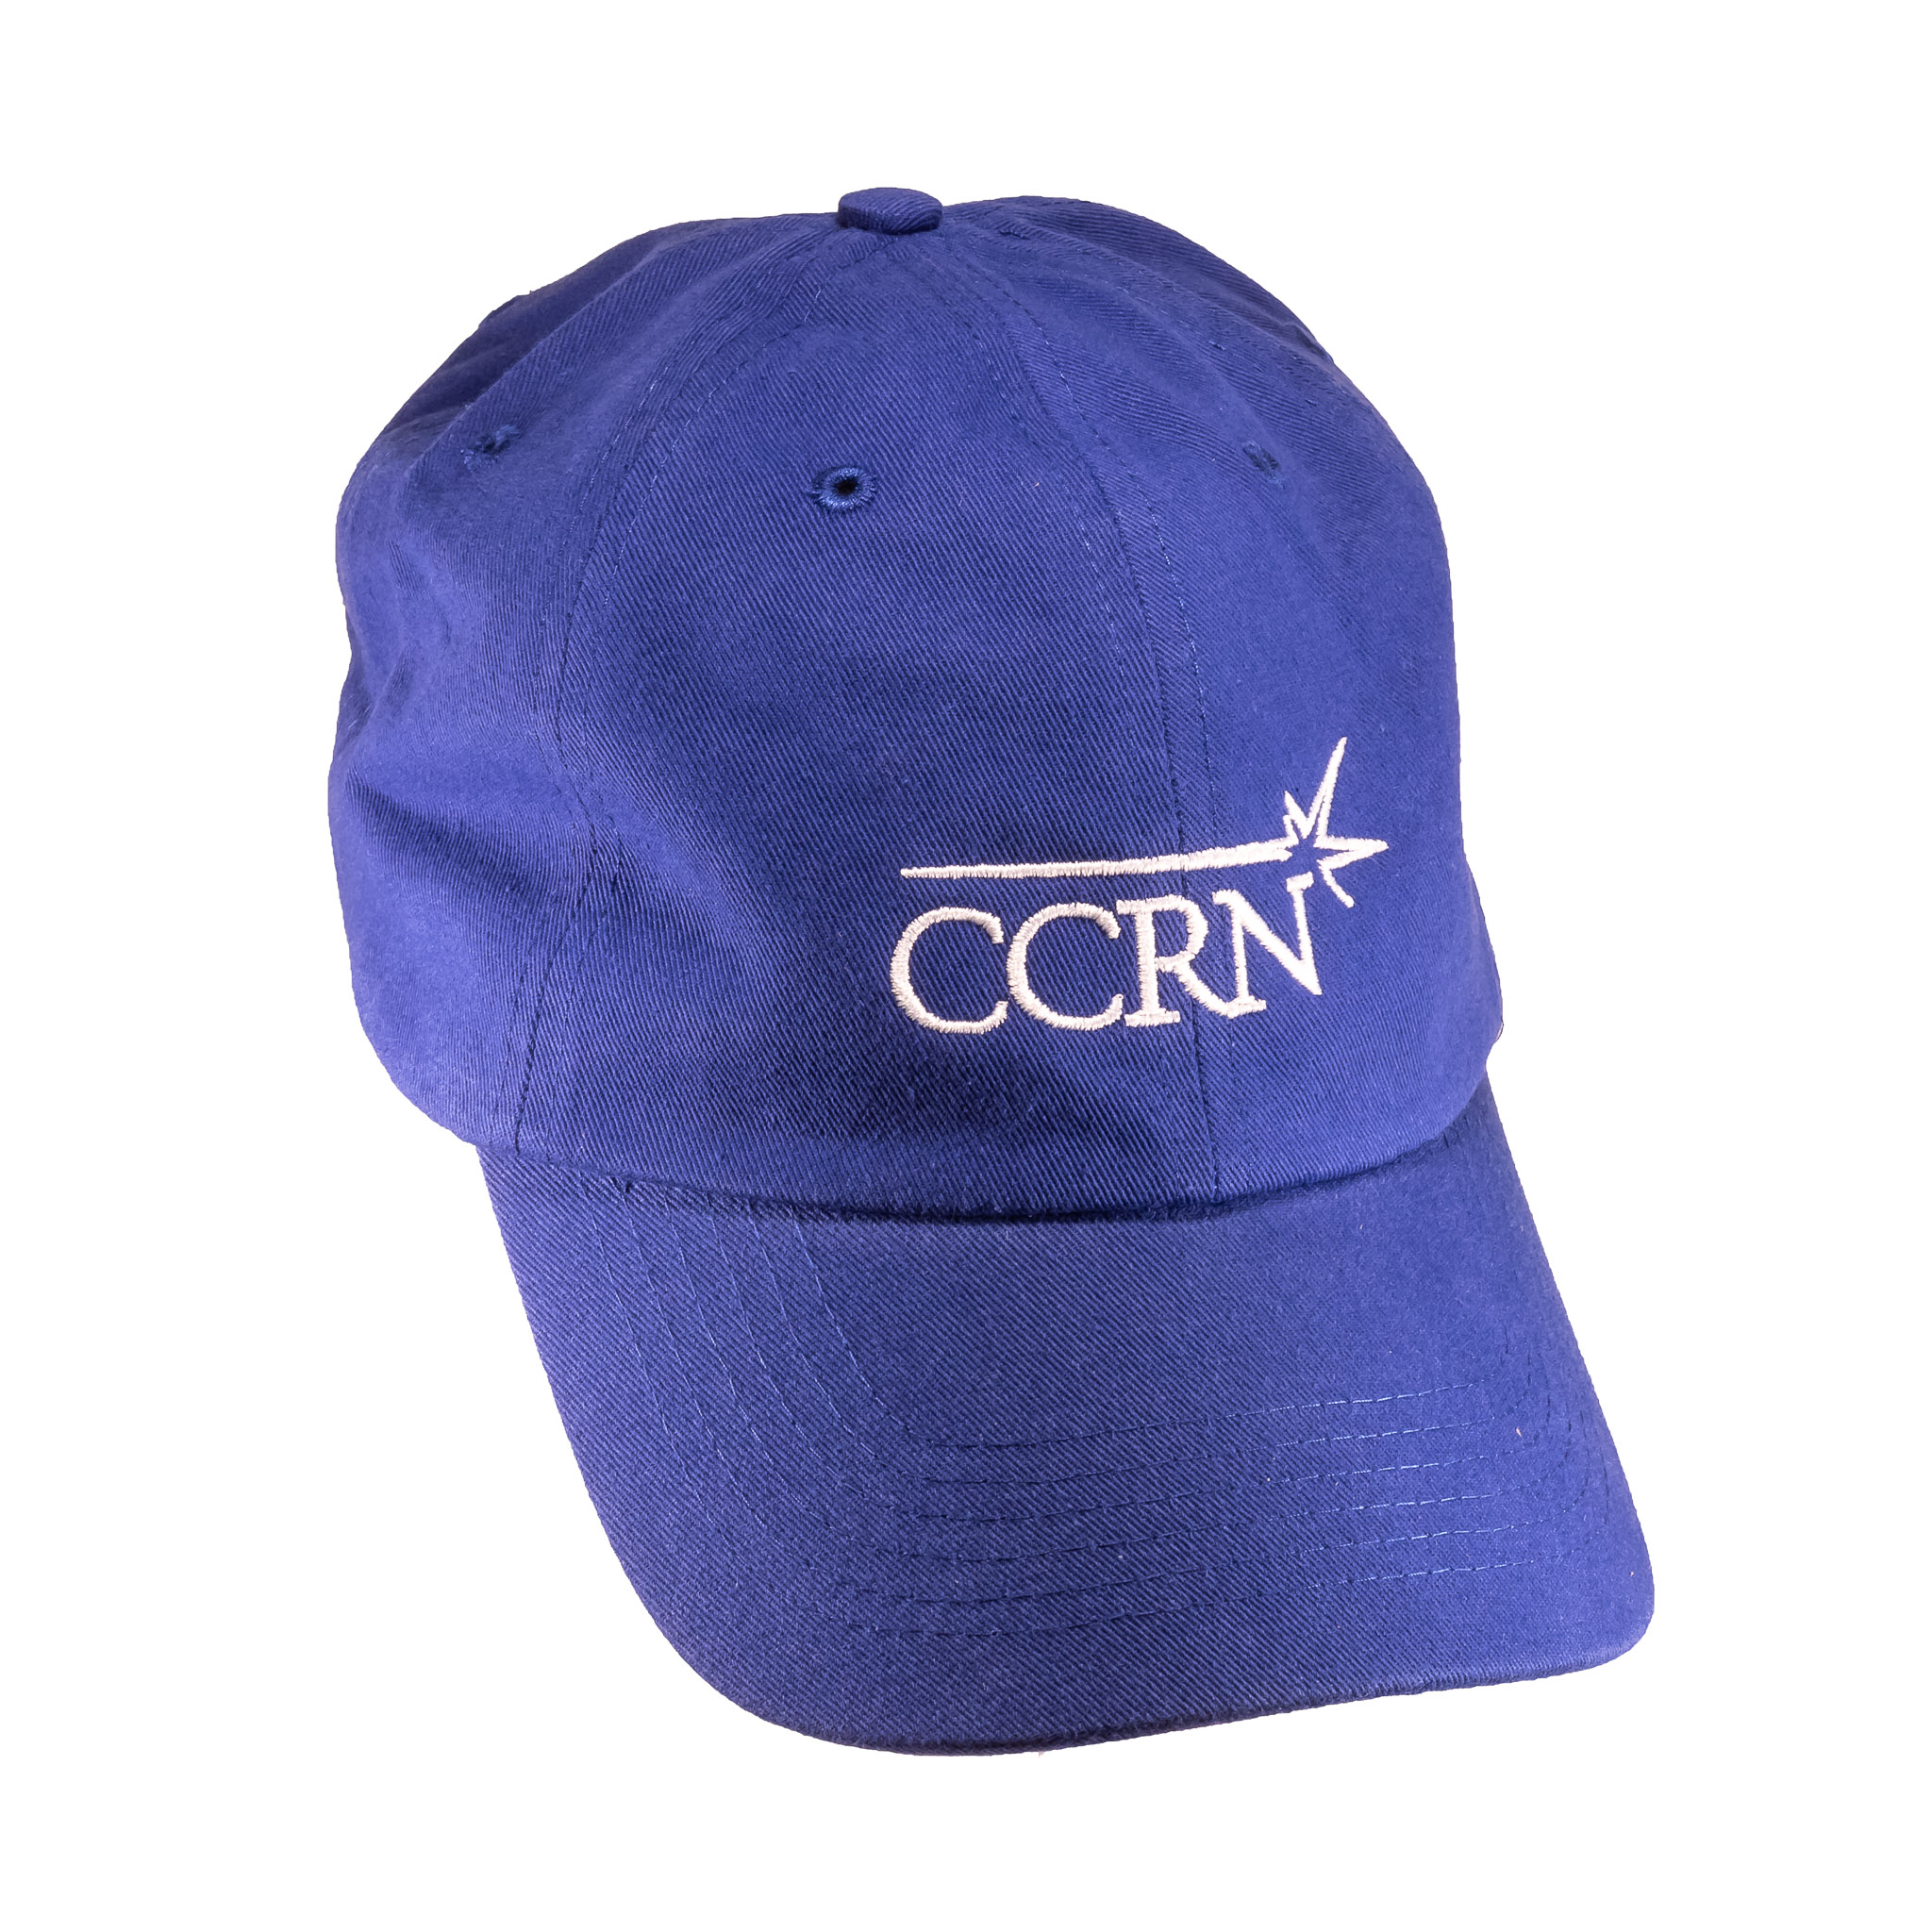 CCRN Brushed Twill Cap in Royal